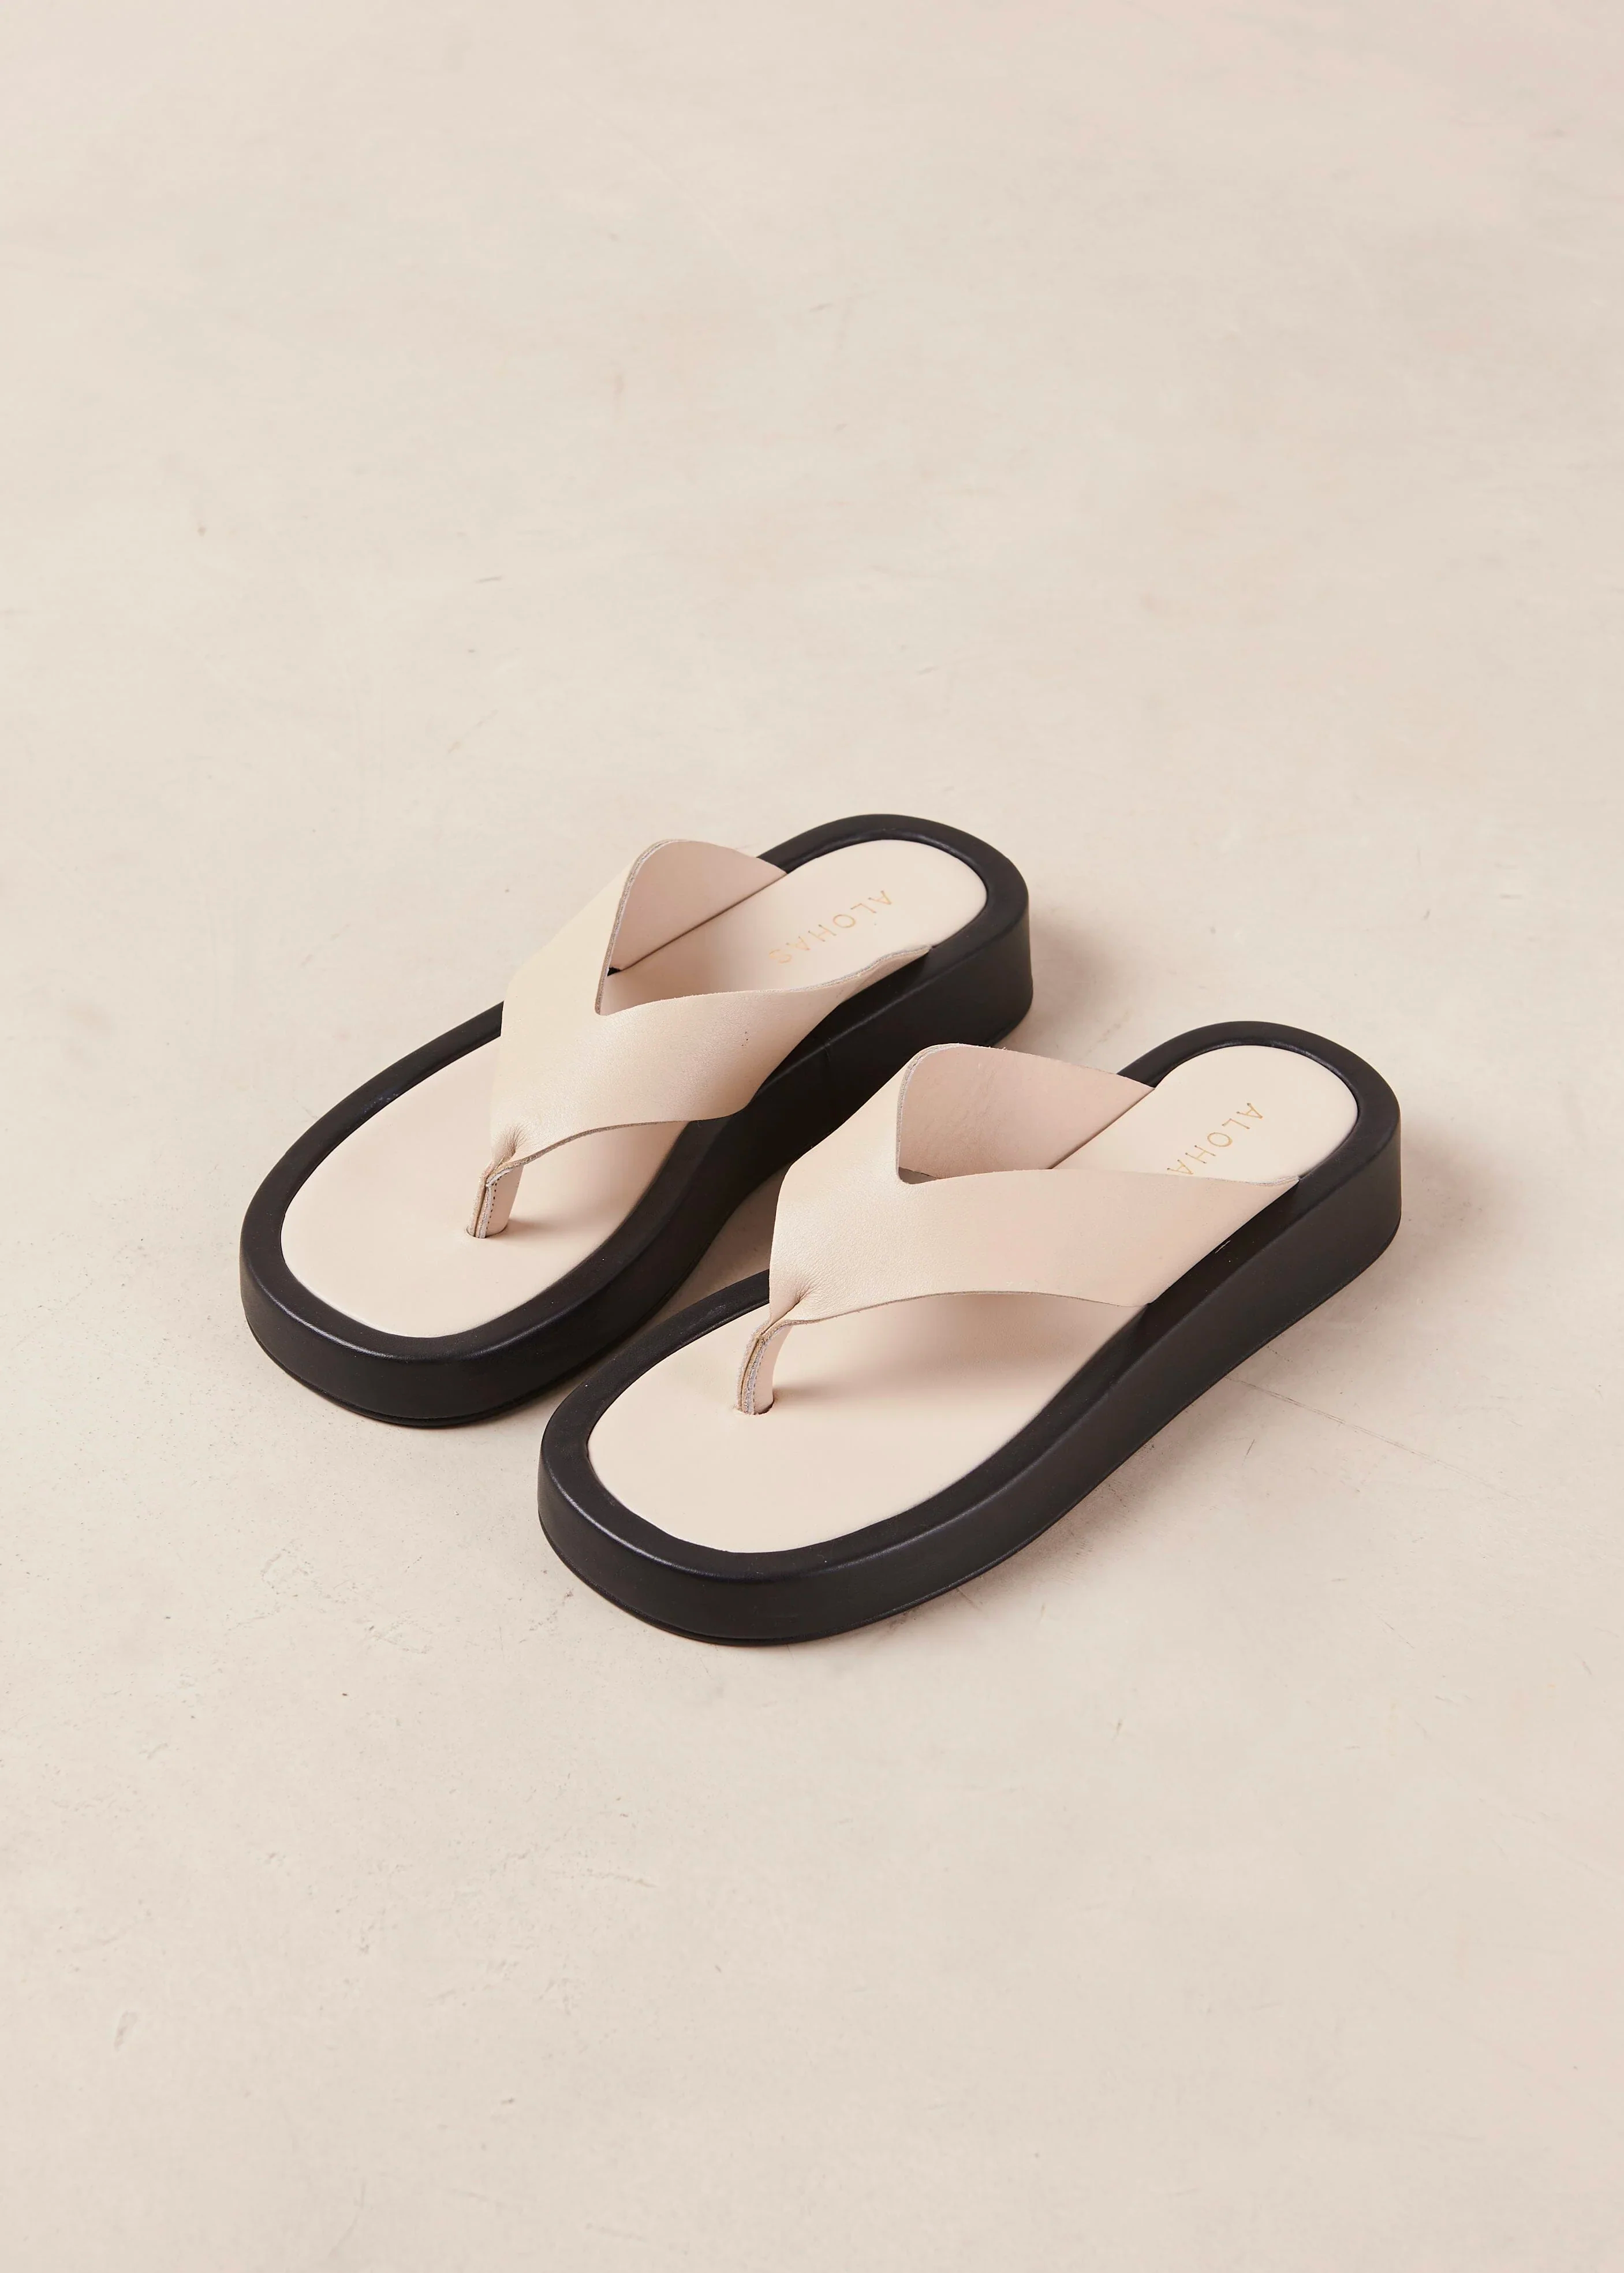 Product Image for Overcast Leather Sandals, Ivory